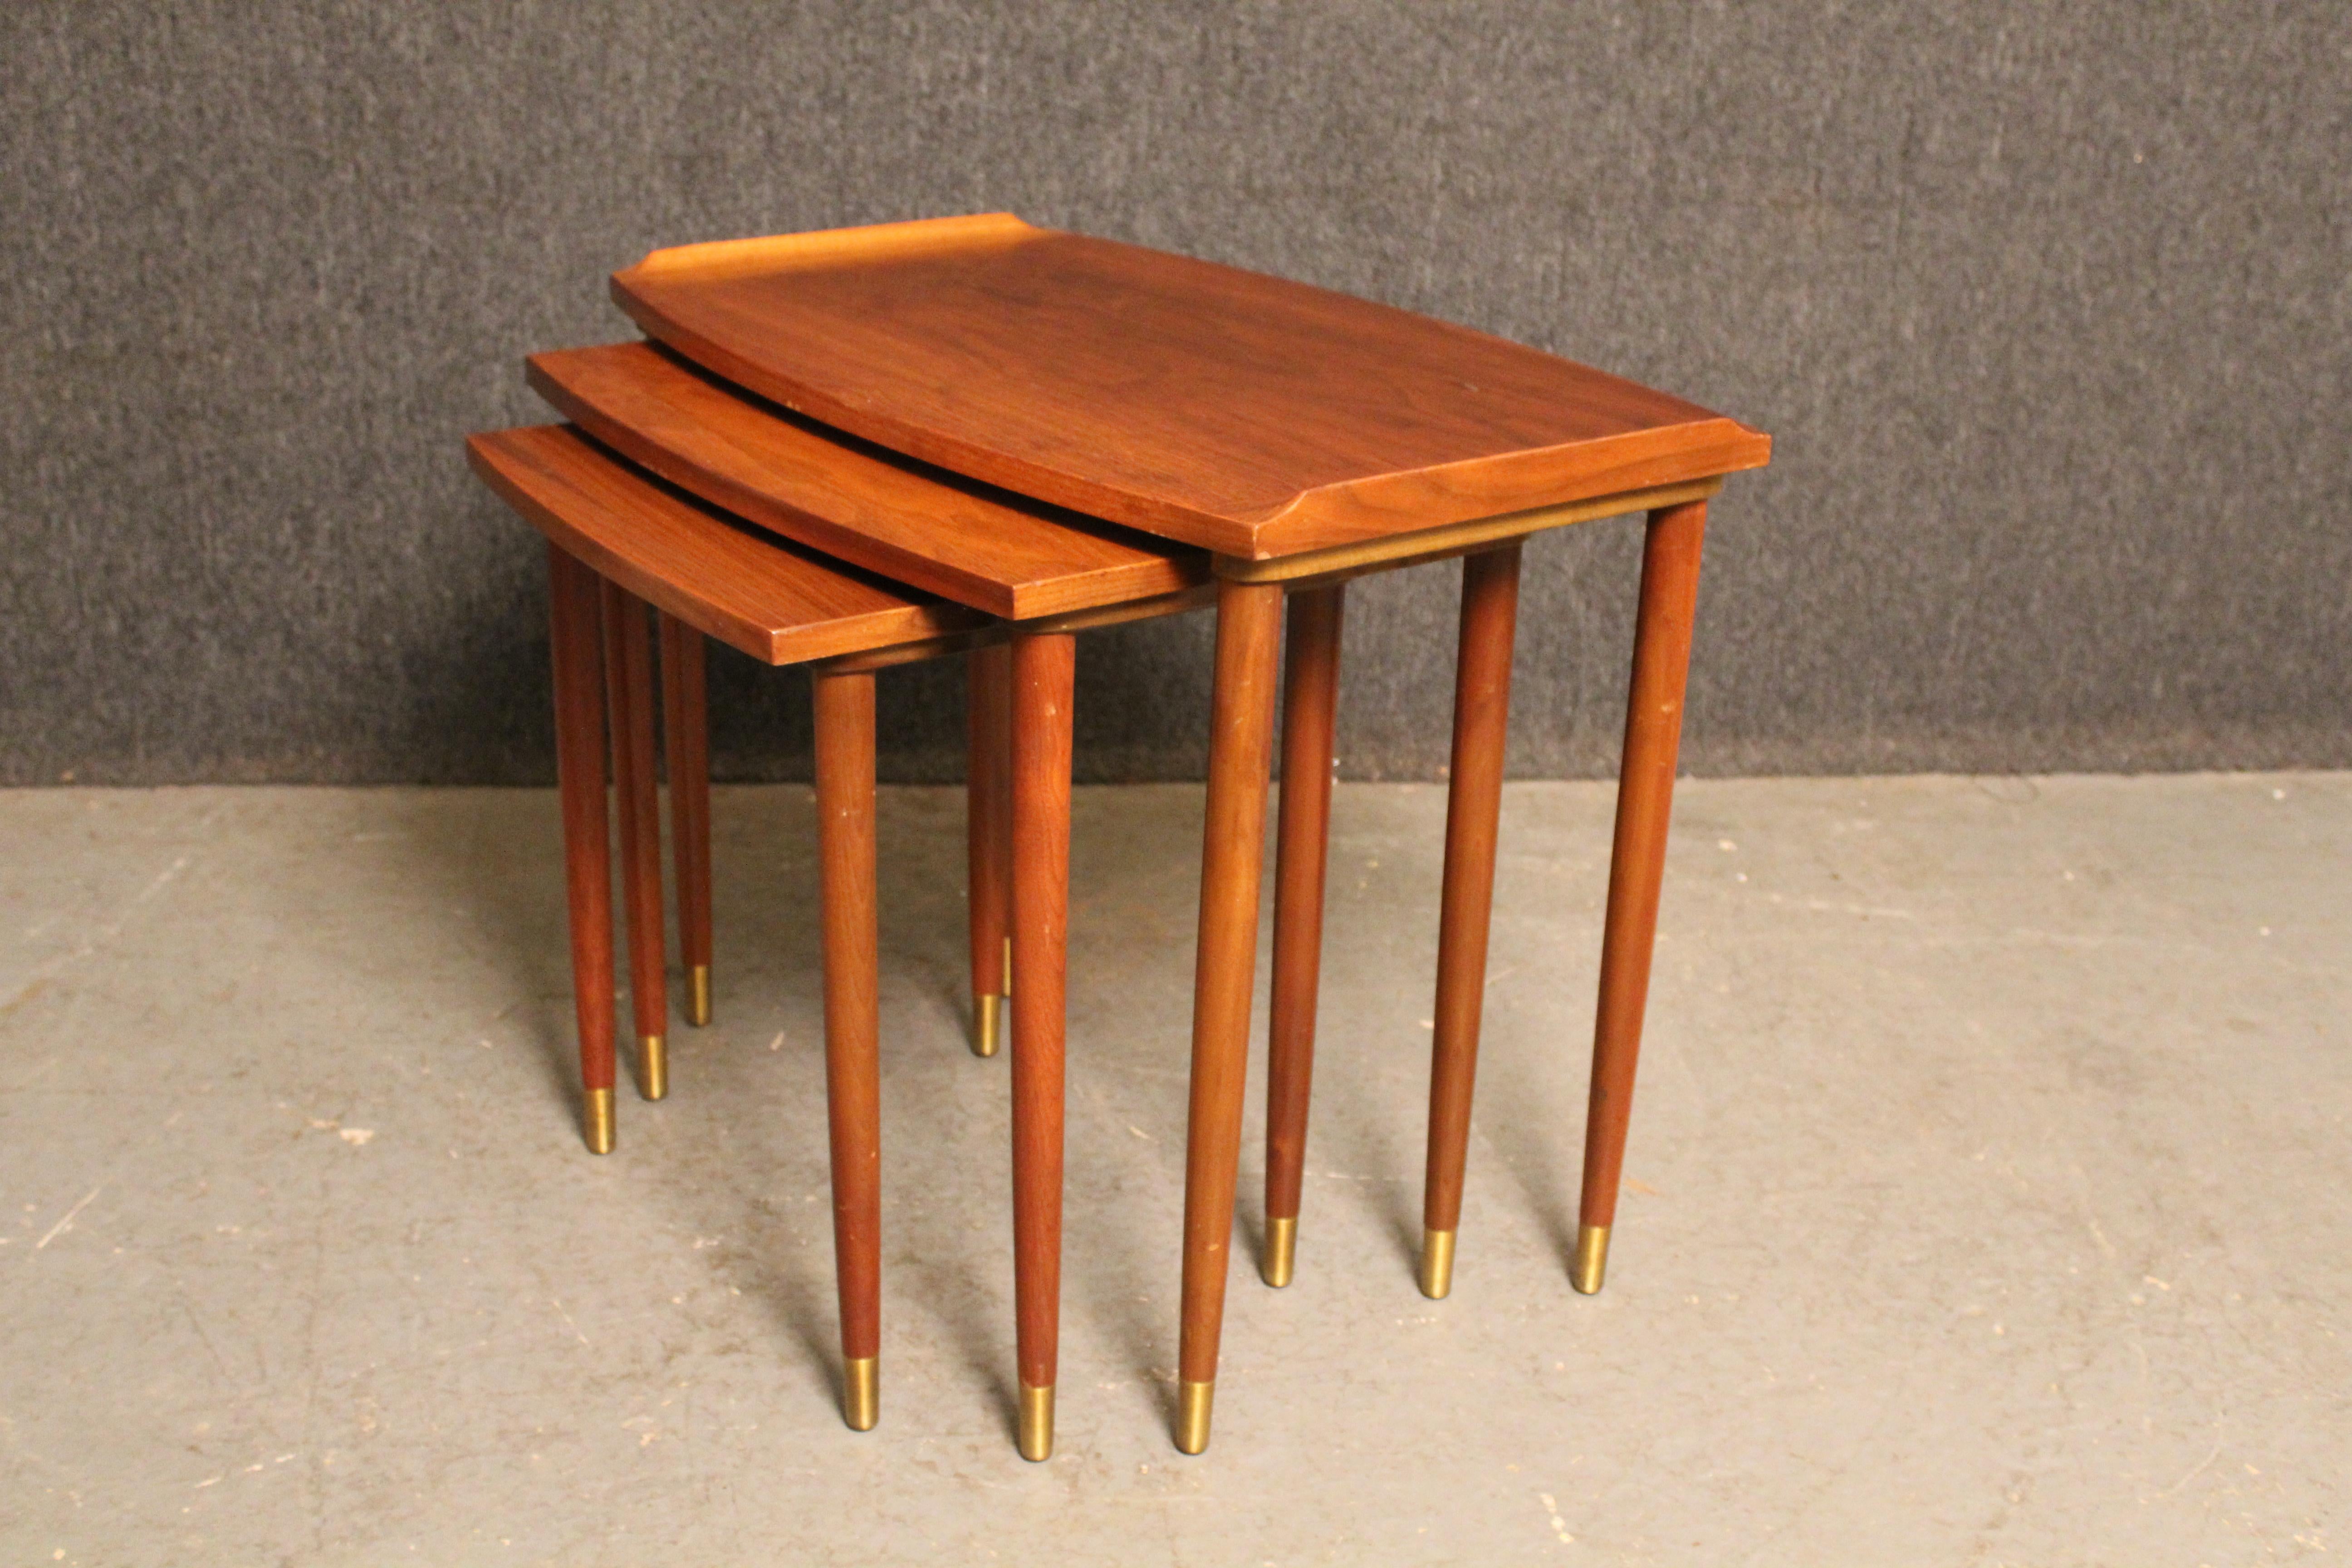 Terrific trio of mid-century vintage nesting tables constructed of beautiful American walnut showcasing a swirling natural wood grain. Coming in three distinct sizes- small (17.5